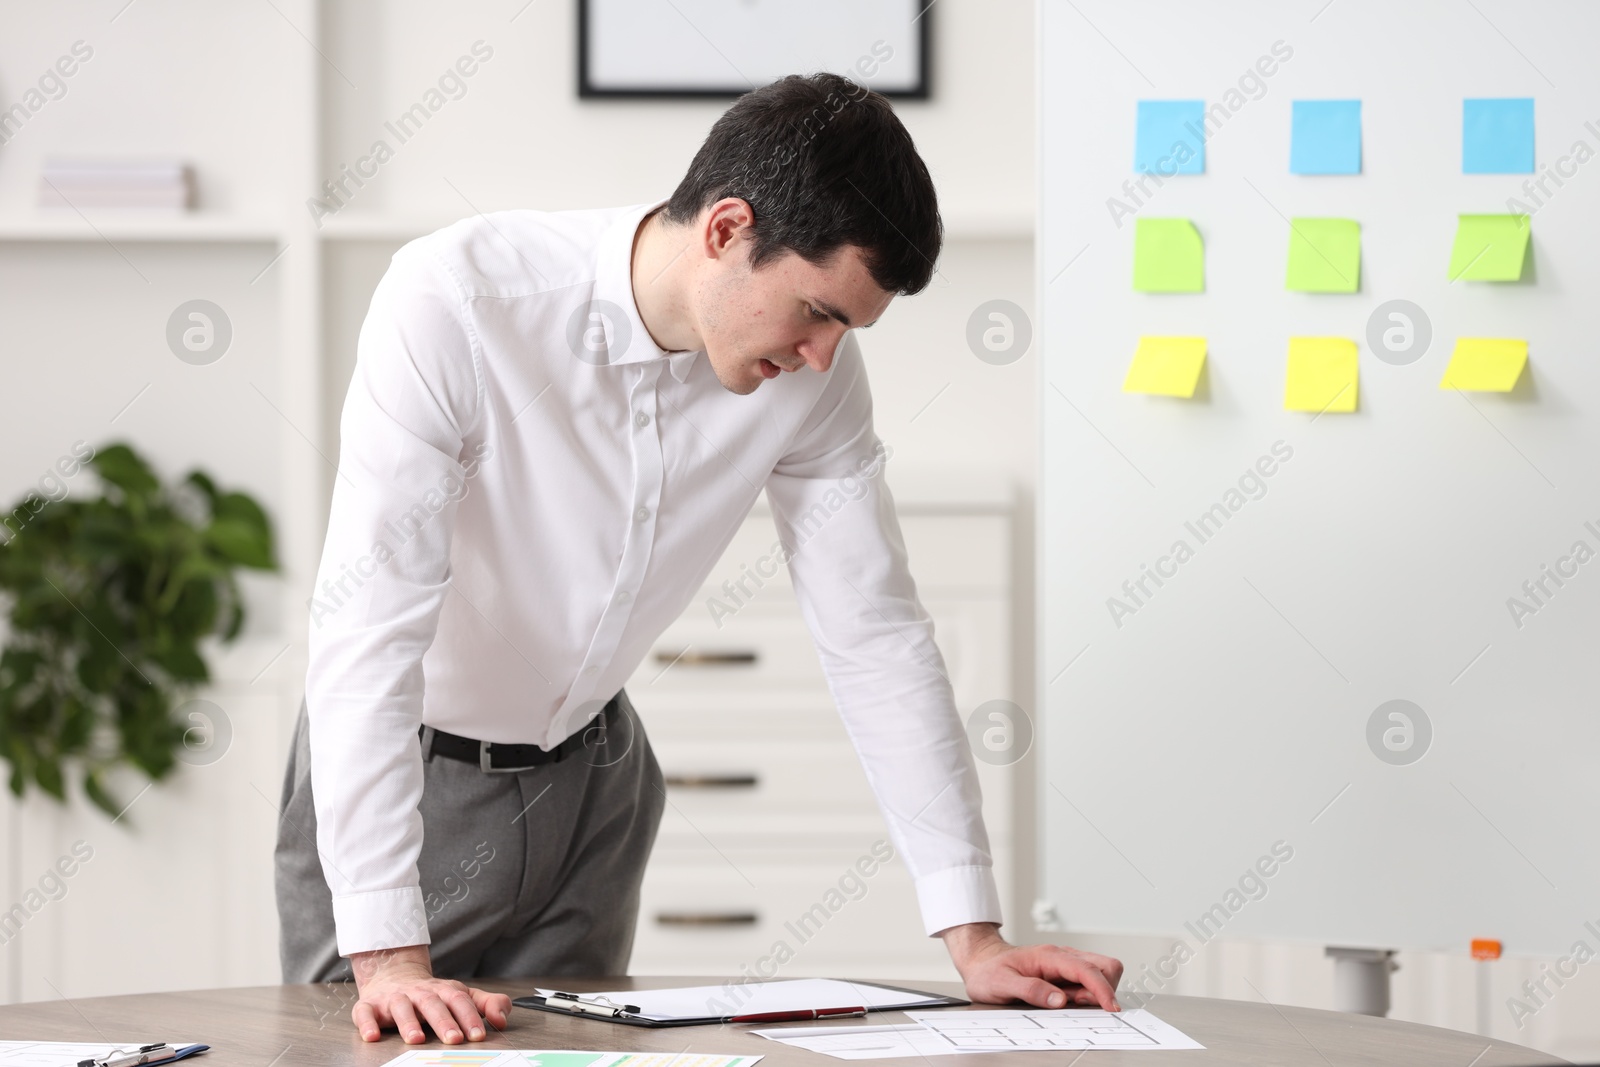 Photo of Embarrassed man near table with documents in office